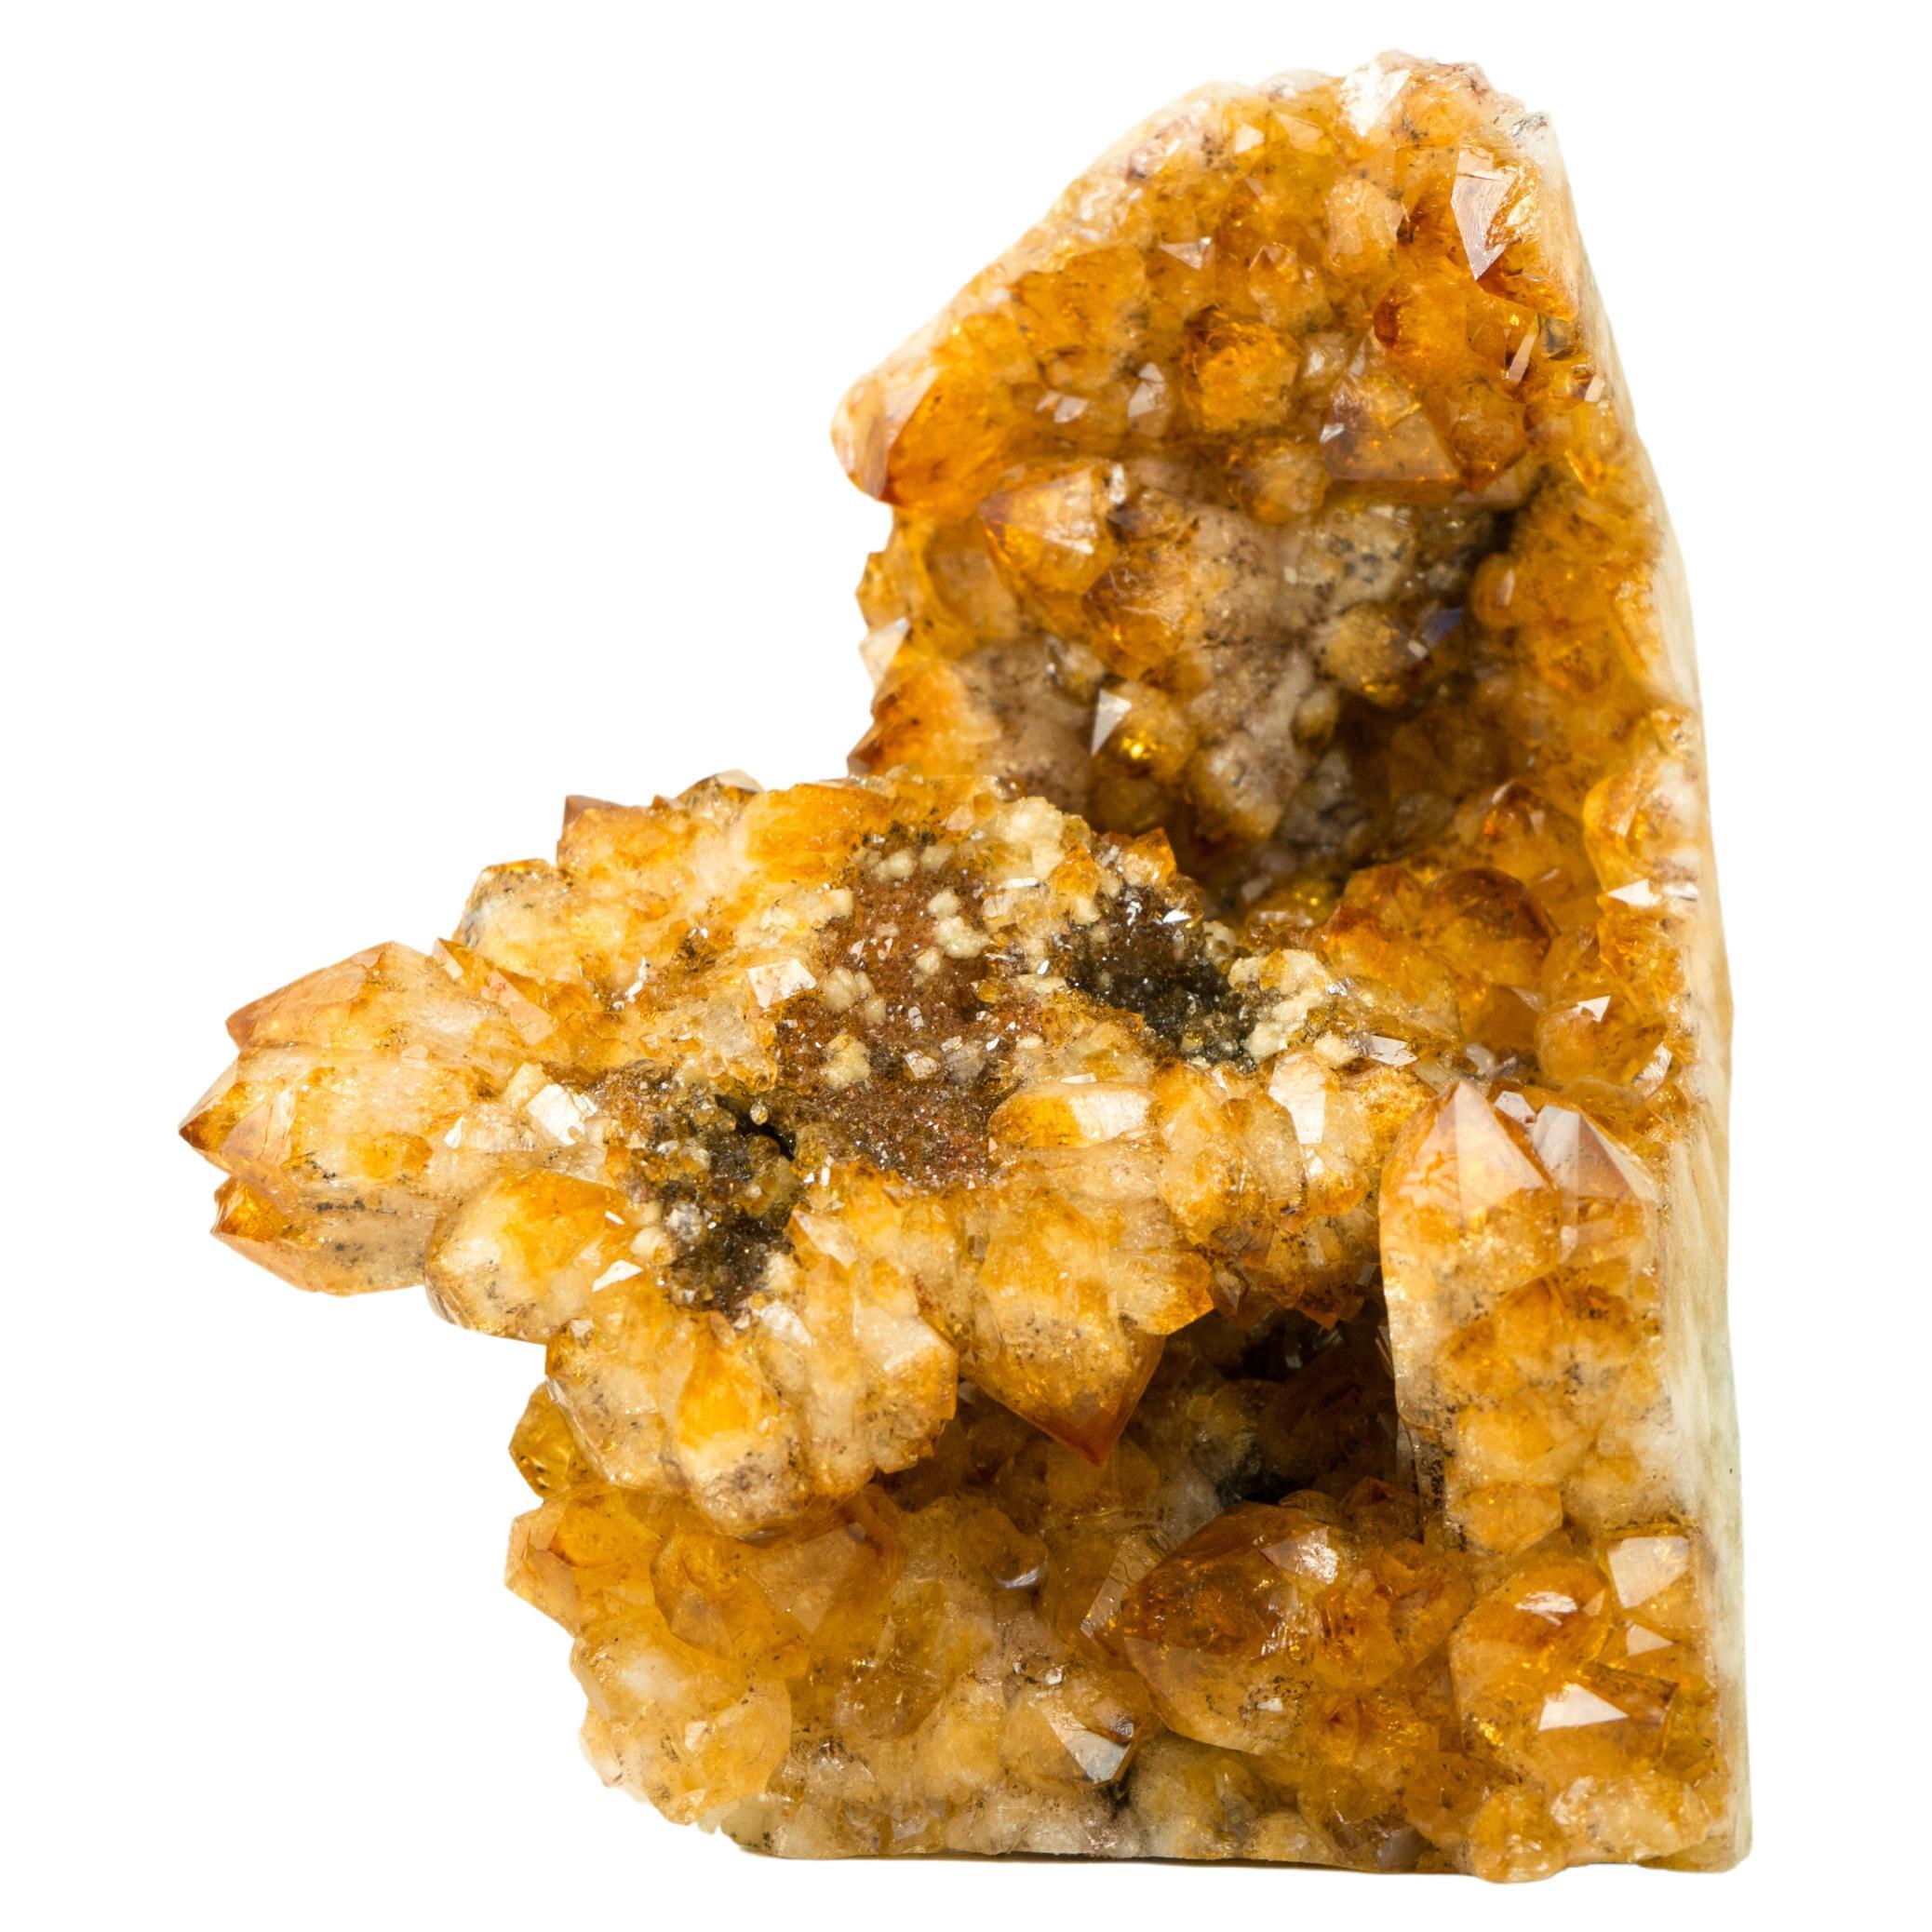 Display Grade Citrine Flower Cluster with Madeira Citrine Druzy, Self Standing For Sale